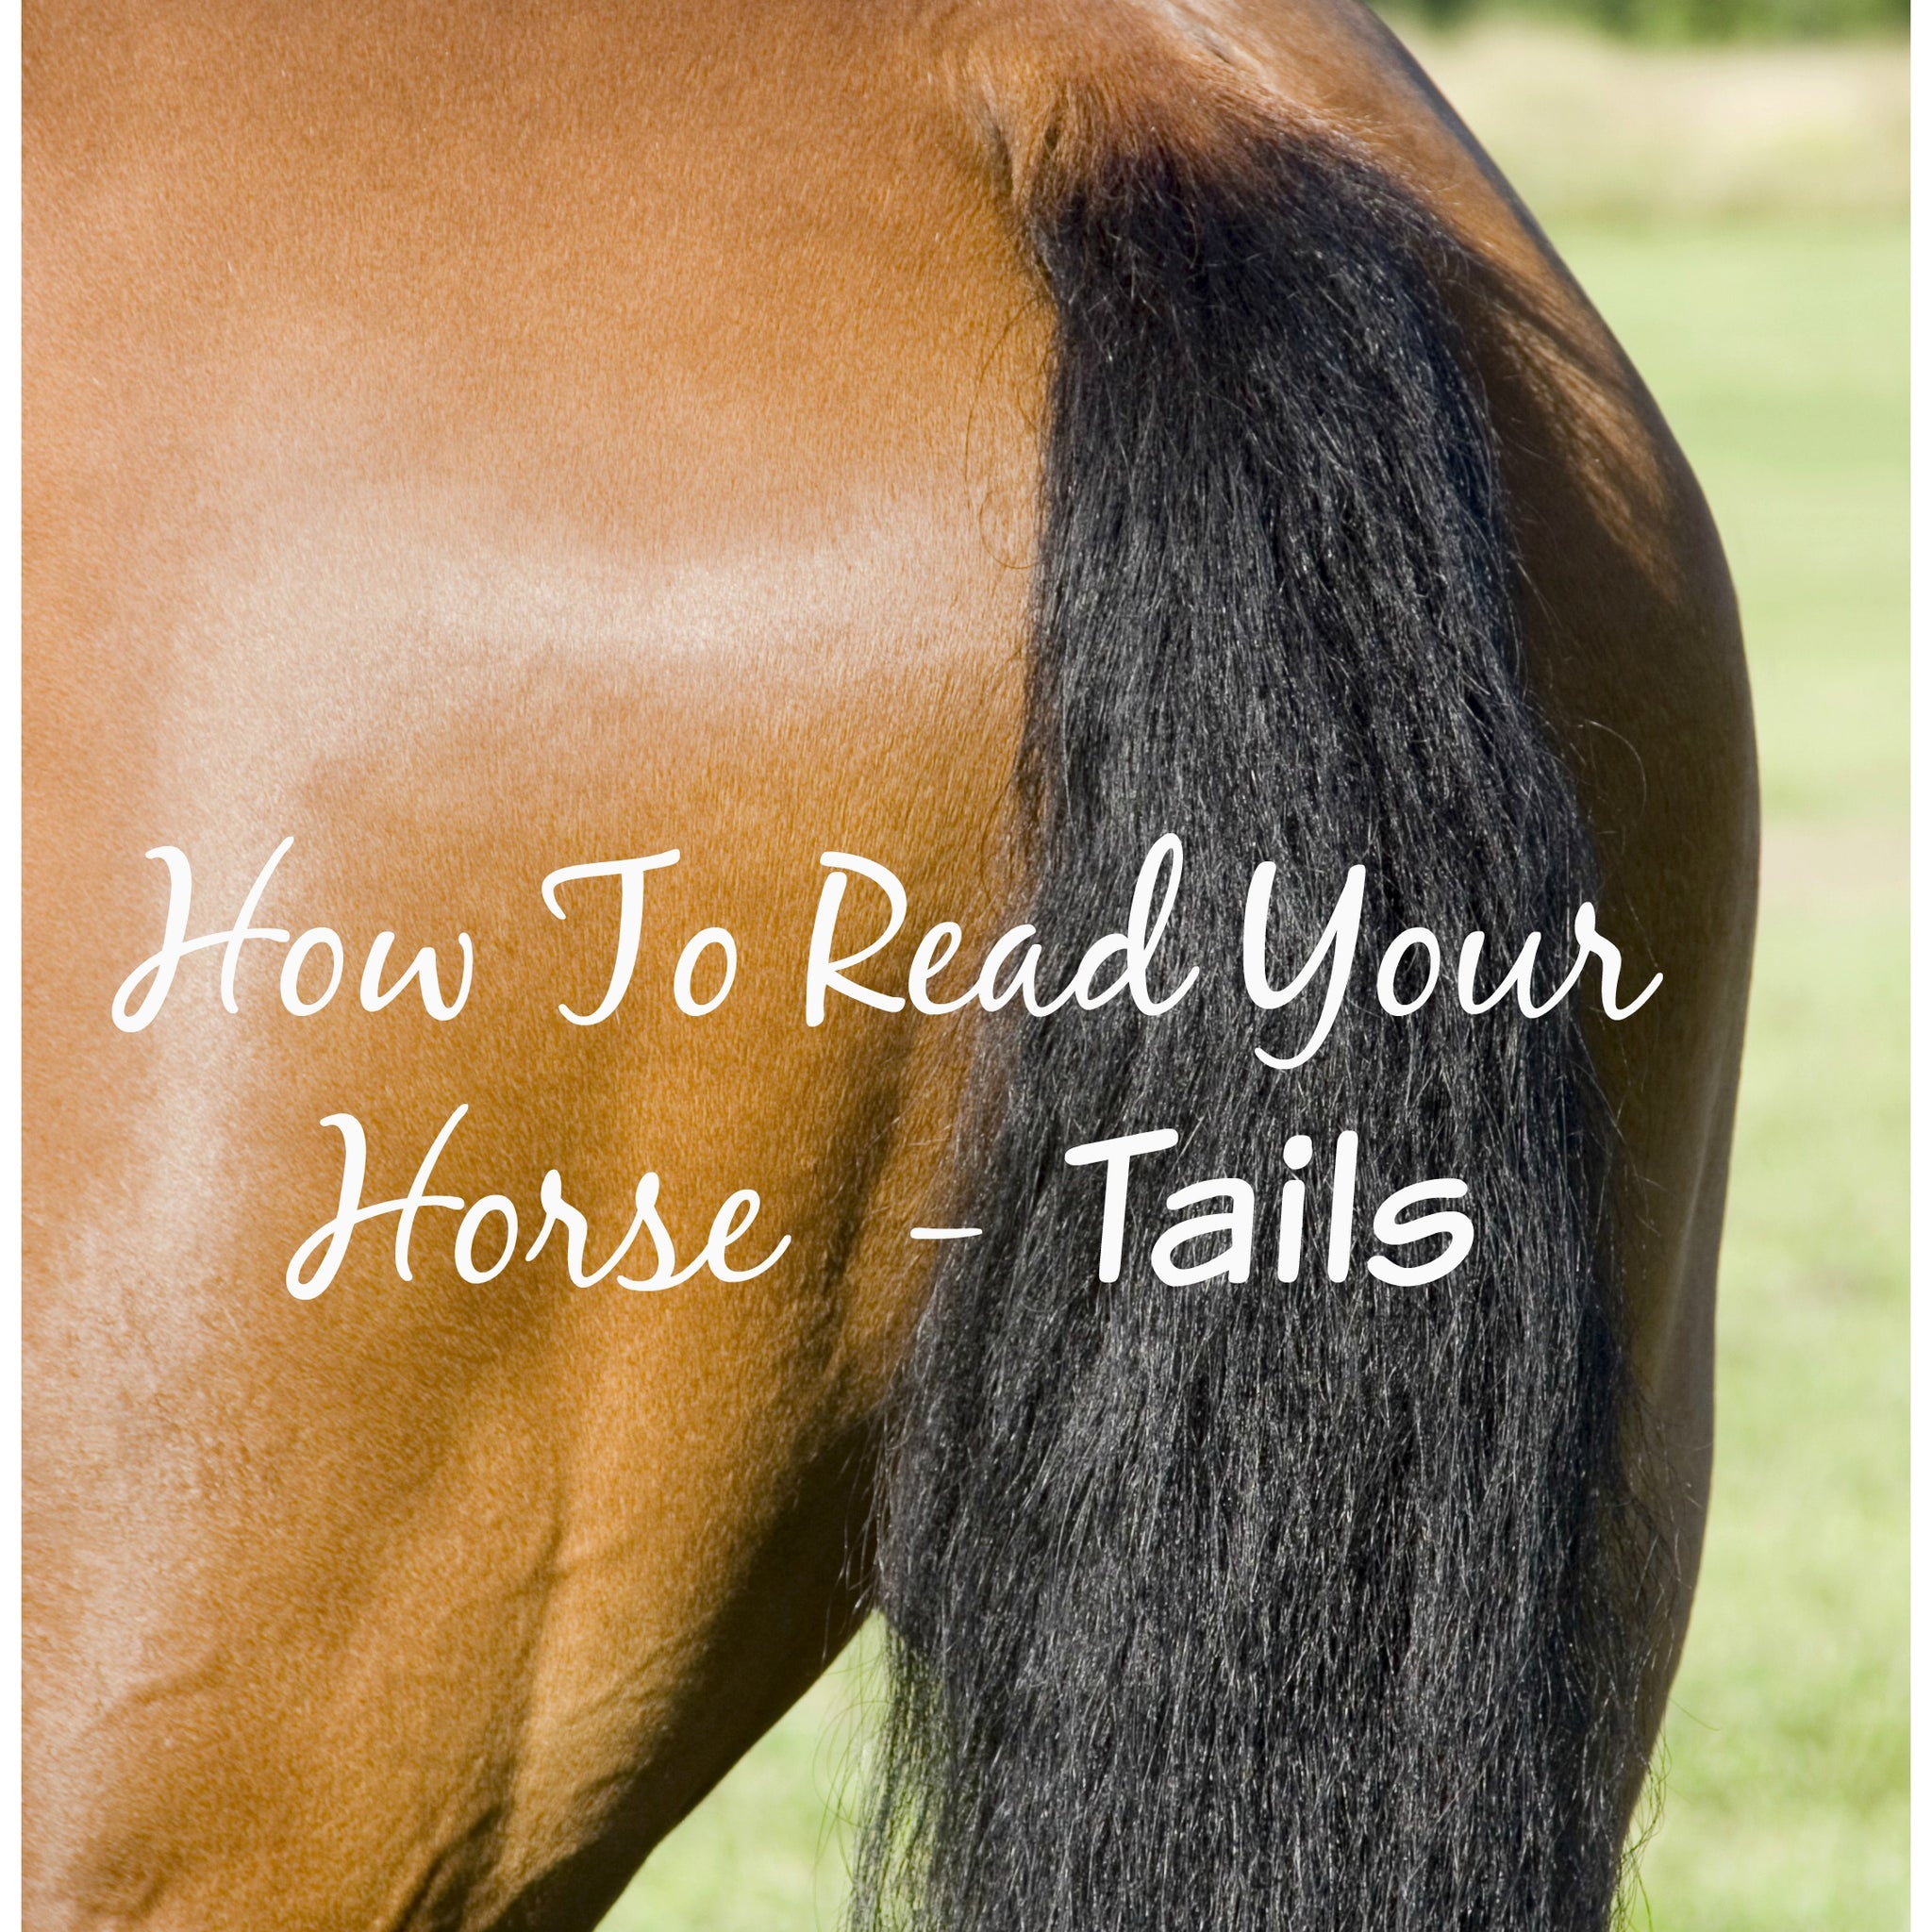 How To Read Your Horse - Tails